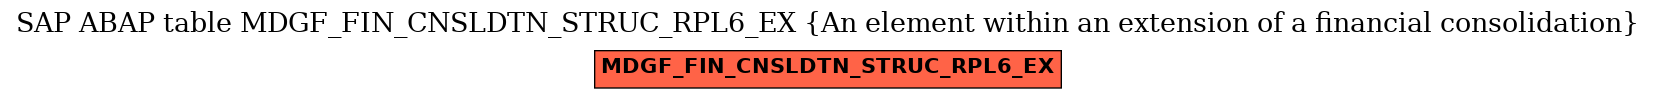 E-R Diagram for table MDGF_FIN_CNSLDTN_STRUC_RPL6_EX (An element within an extension of a financial consolidation)